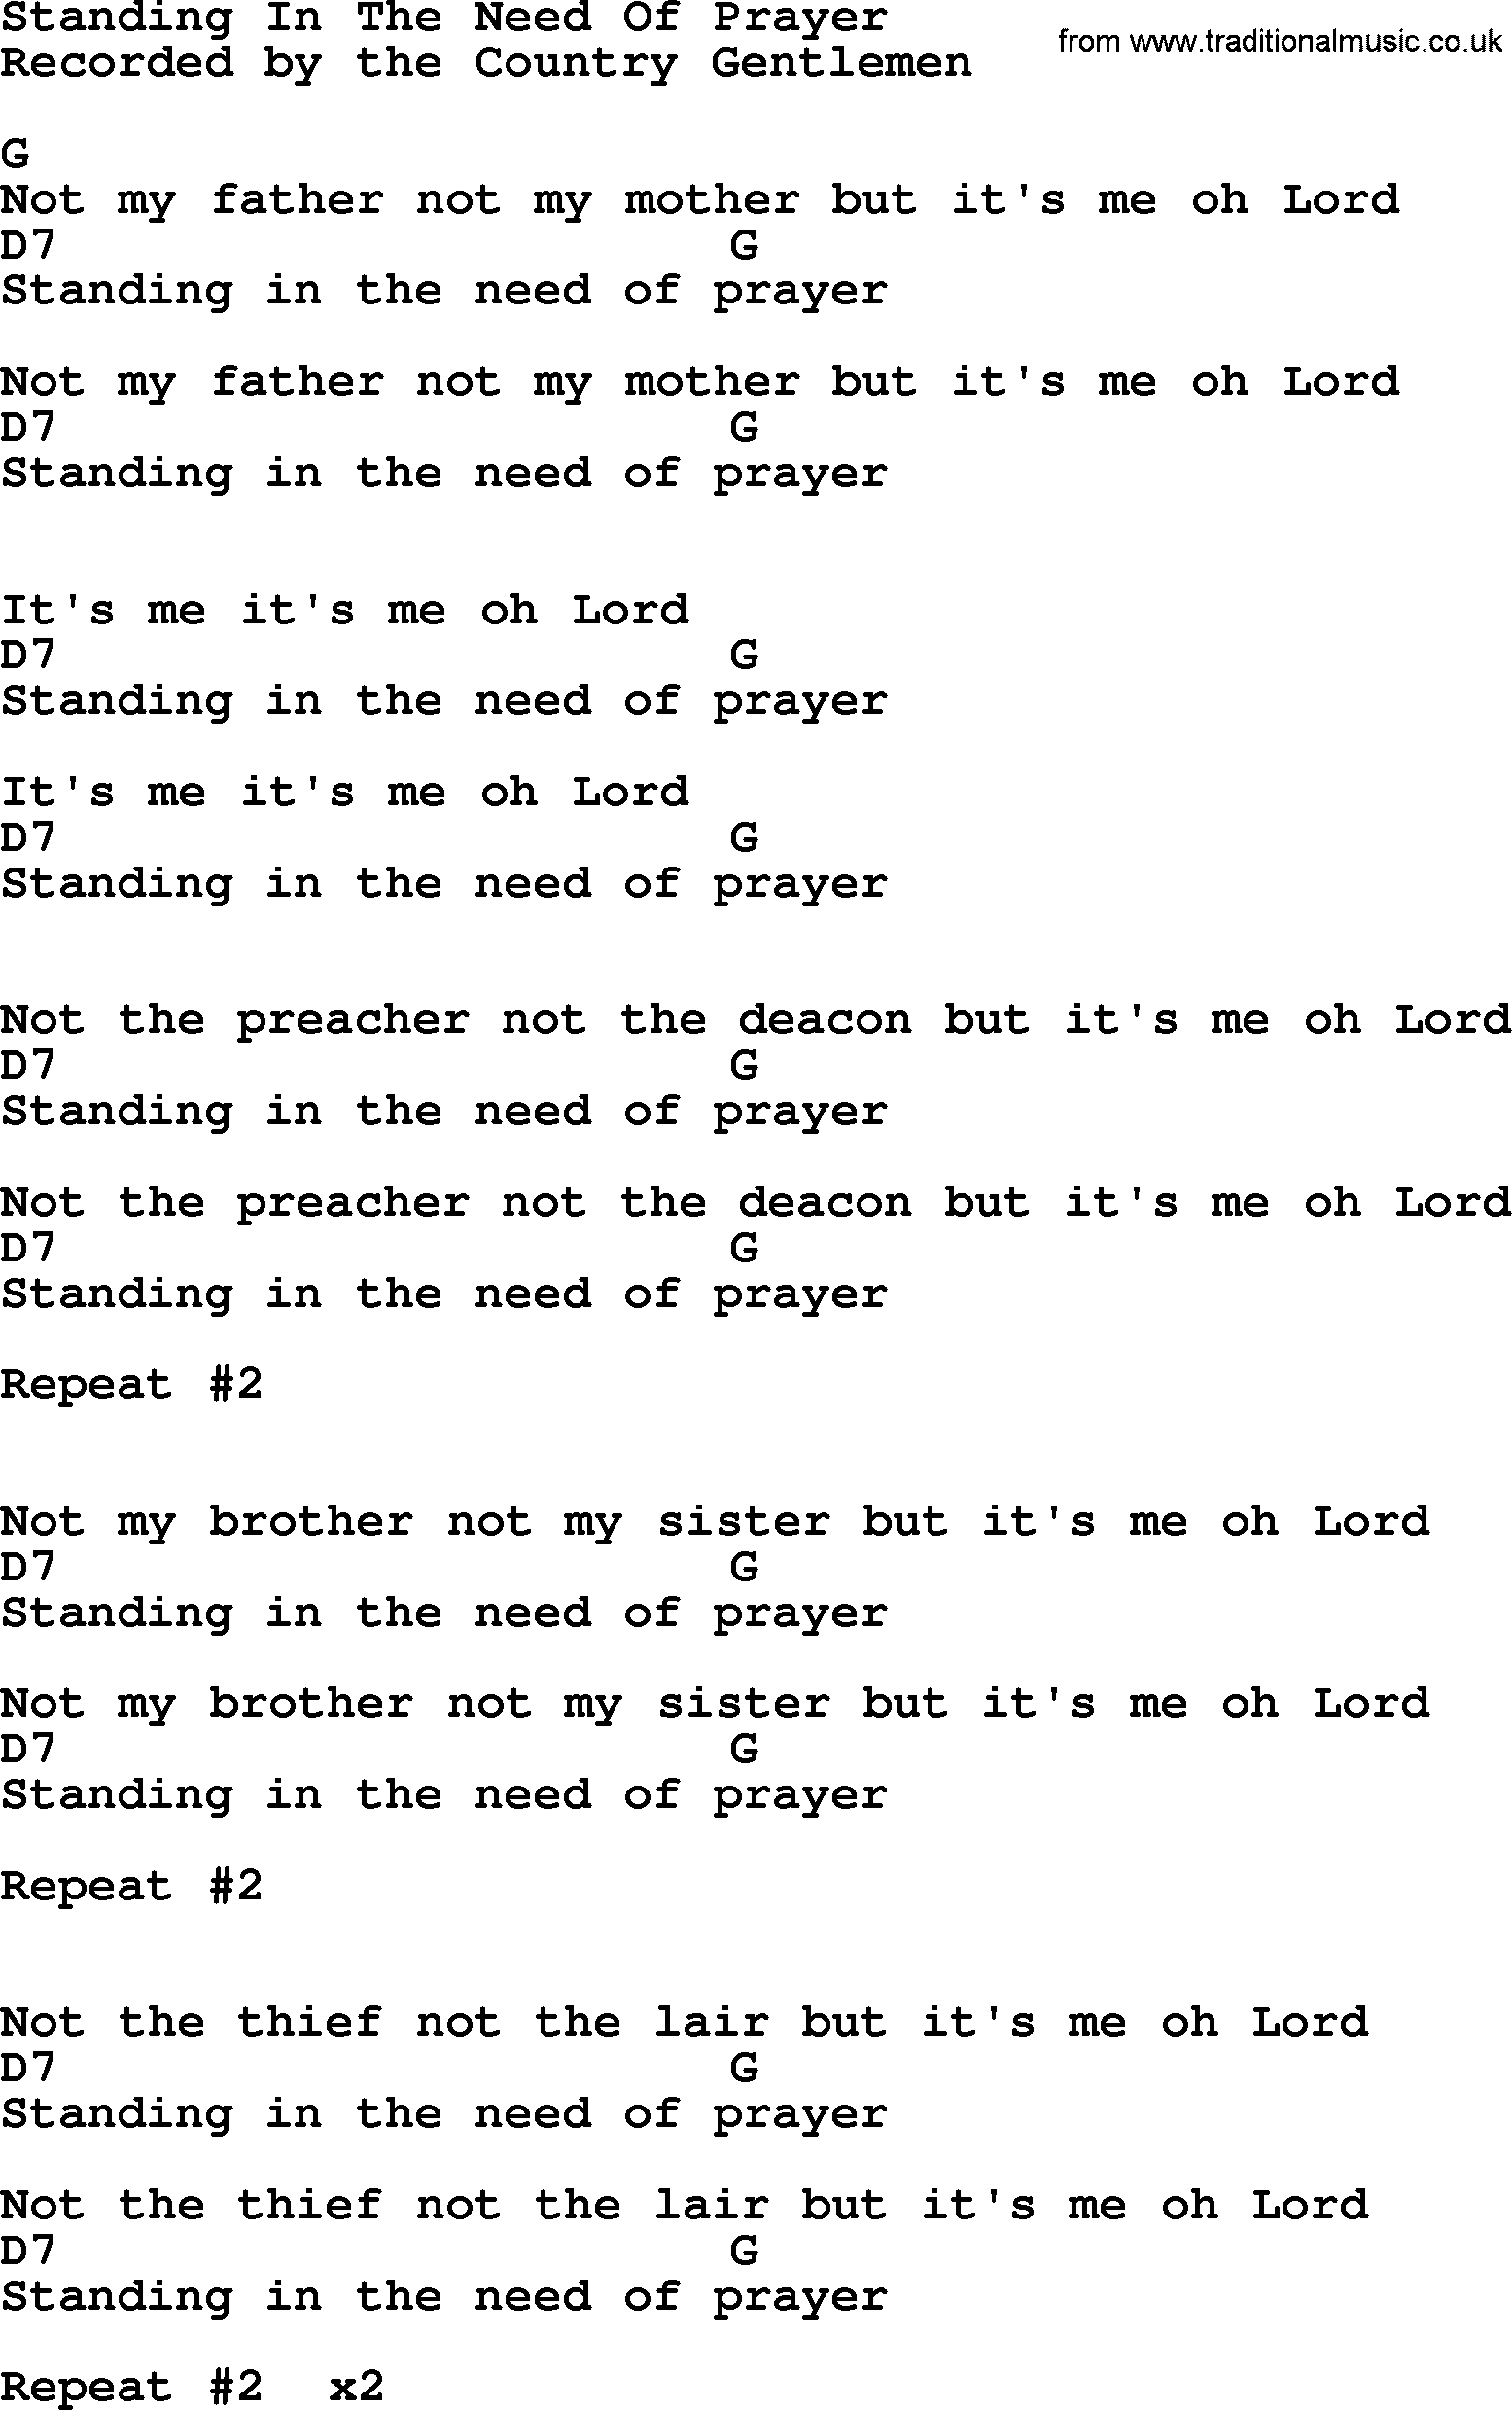 Bluegrass song: Standing In The Need Of Prayer, lyrics and chords